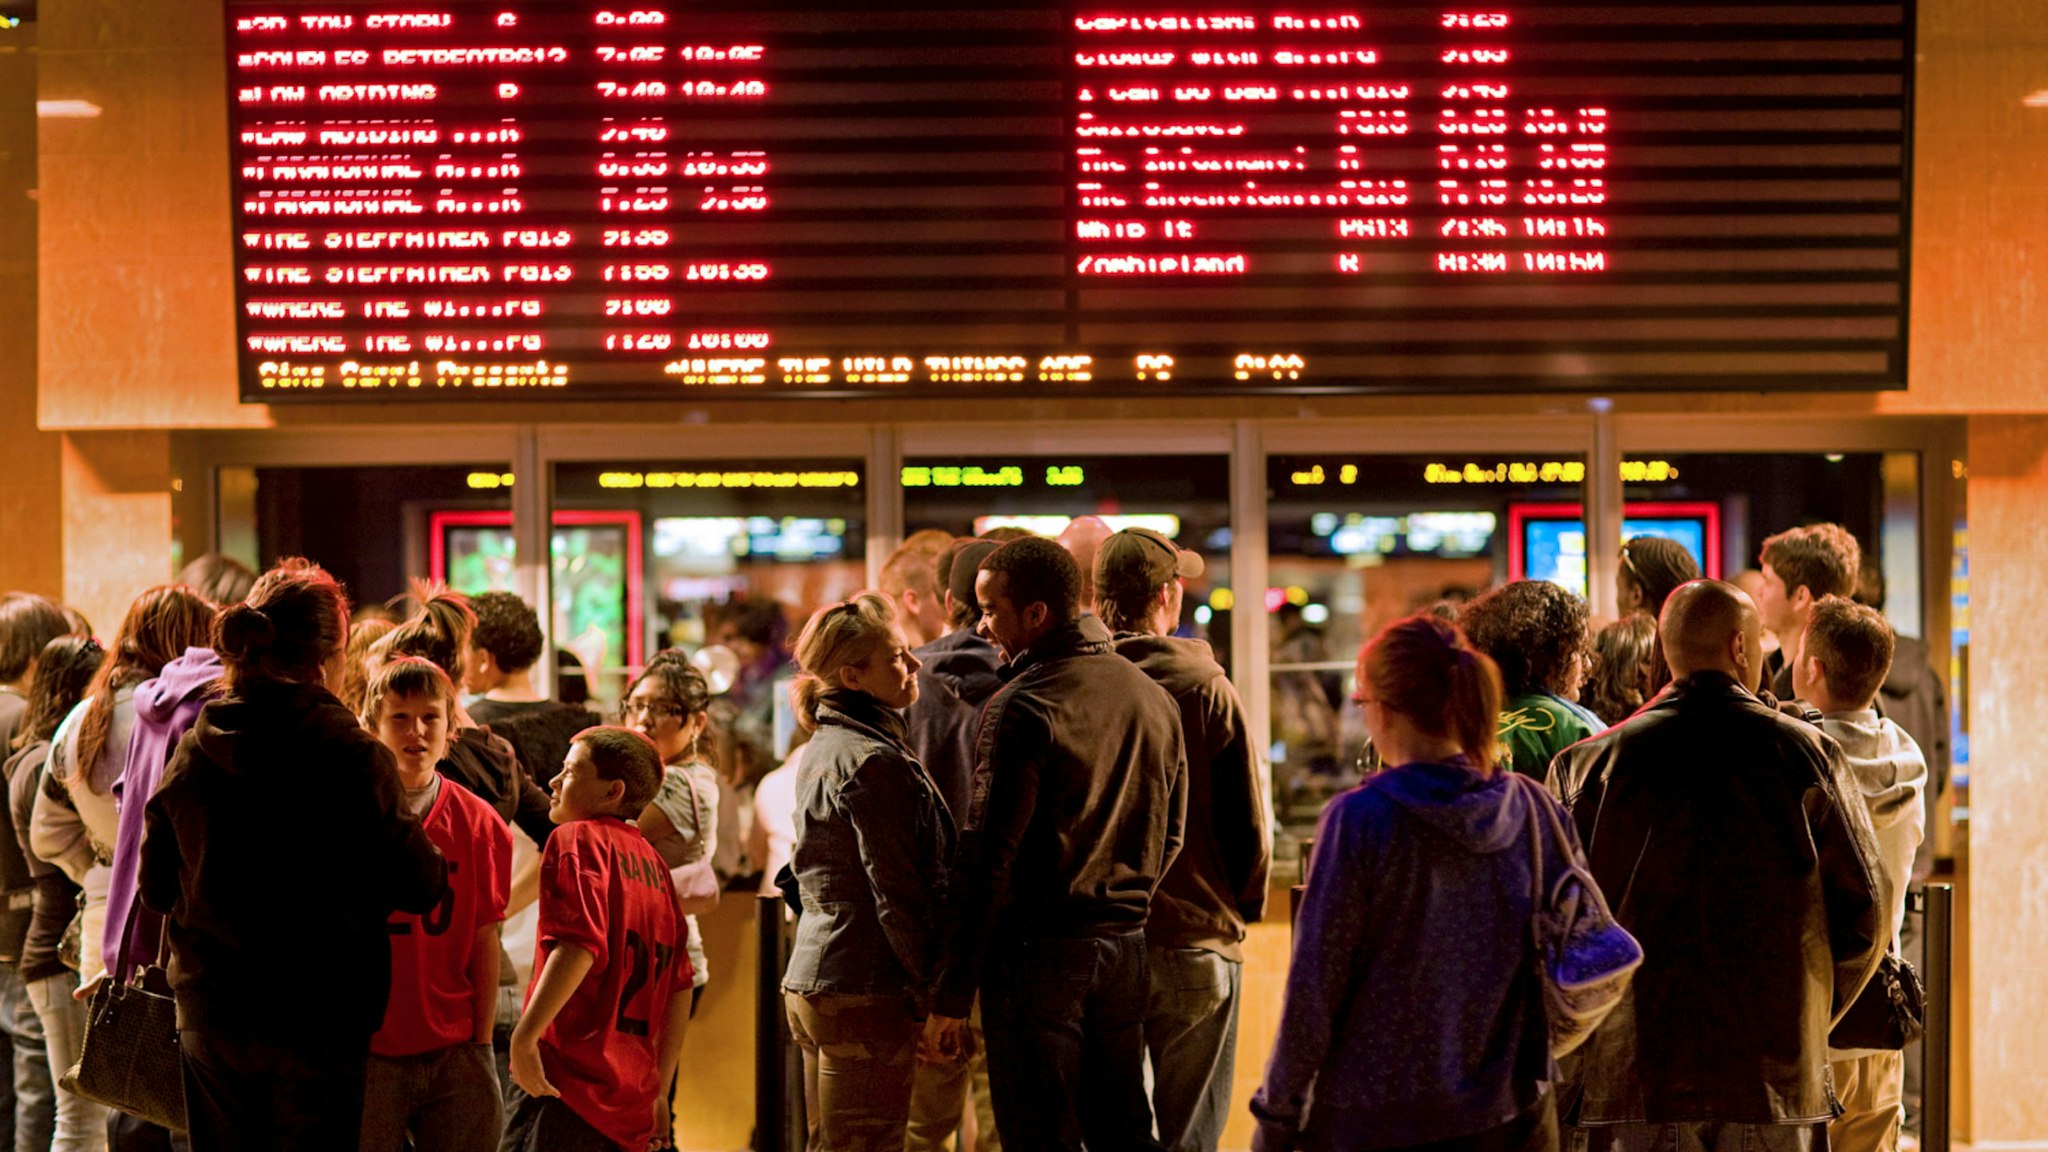 Movie-goers wait in line to buy tickets at a Harkins movie theater in Denver, Colorado, U.S., on Friday, Oct. 16, 2009.